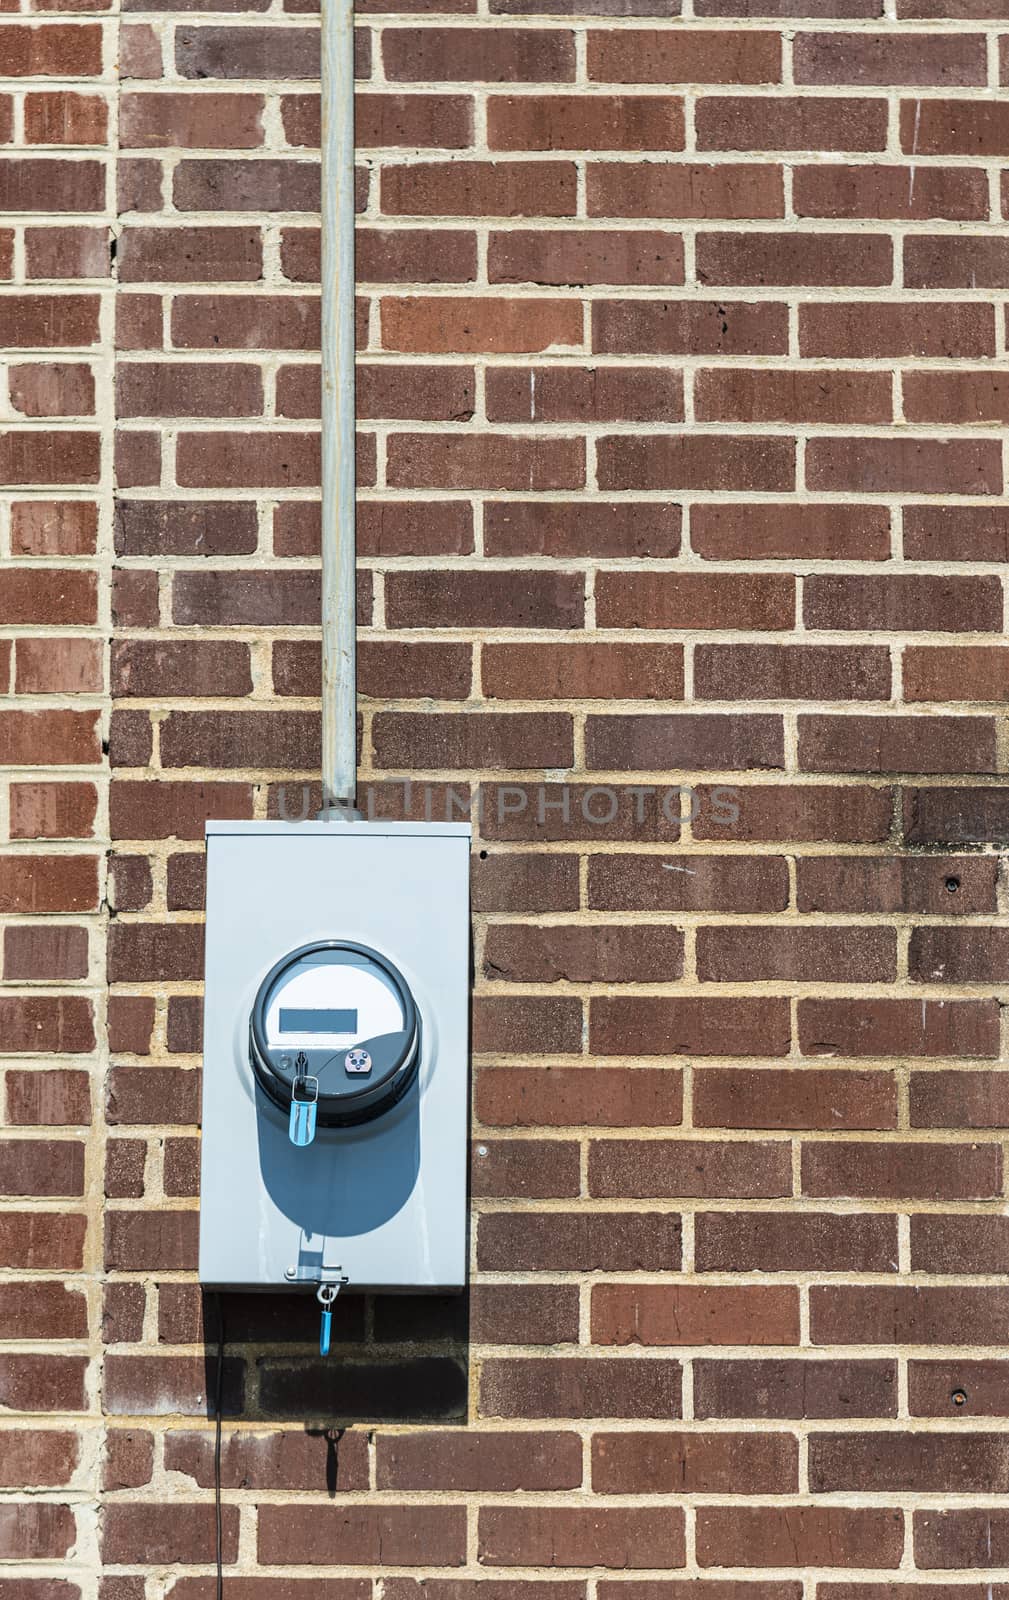 Electric Meter On Old Brick Wall Vertical by stockbuster1